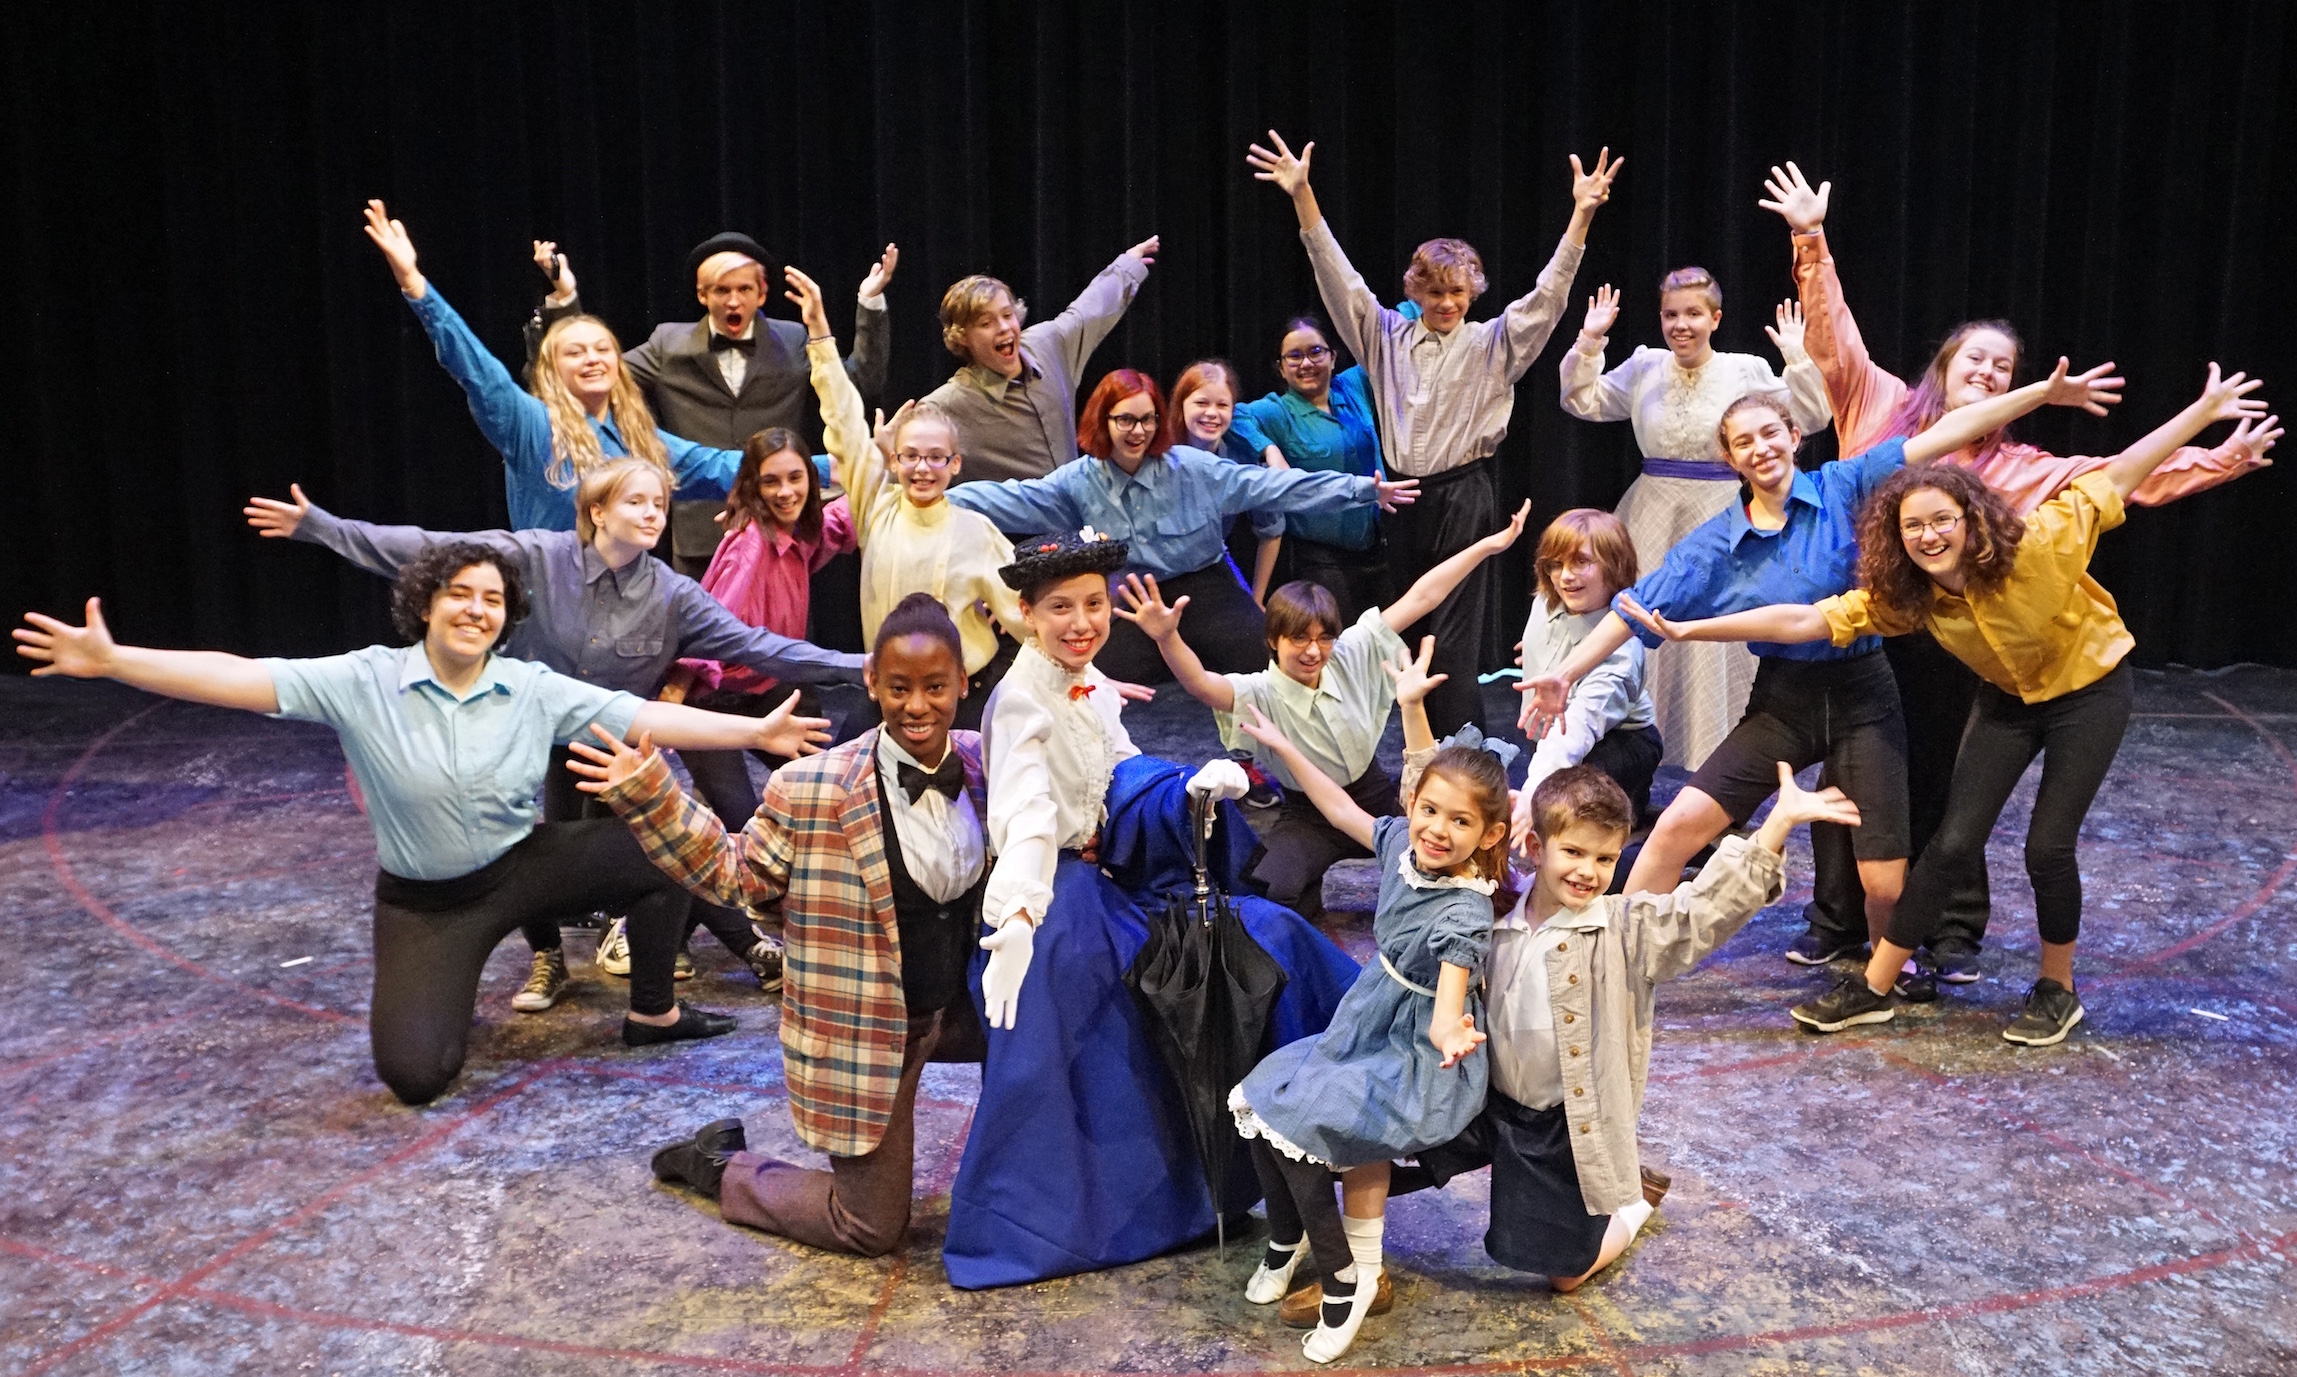 the Ensemble of Mary Poppins indulges in a little Razzle Dazzle "jazz hands" moment!